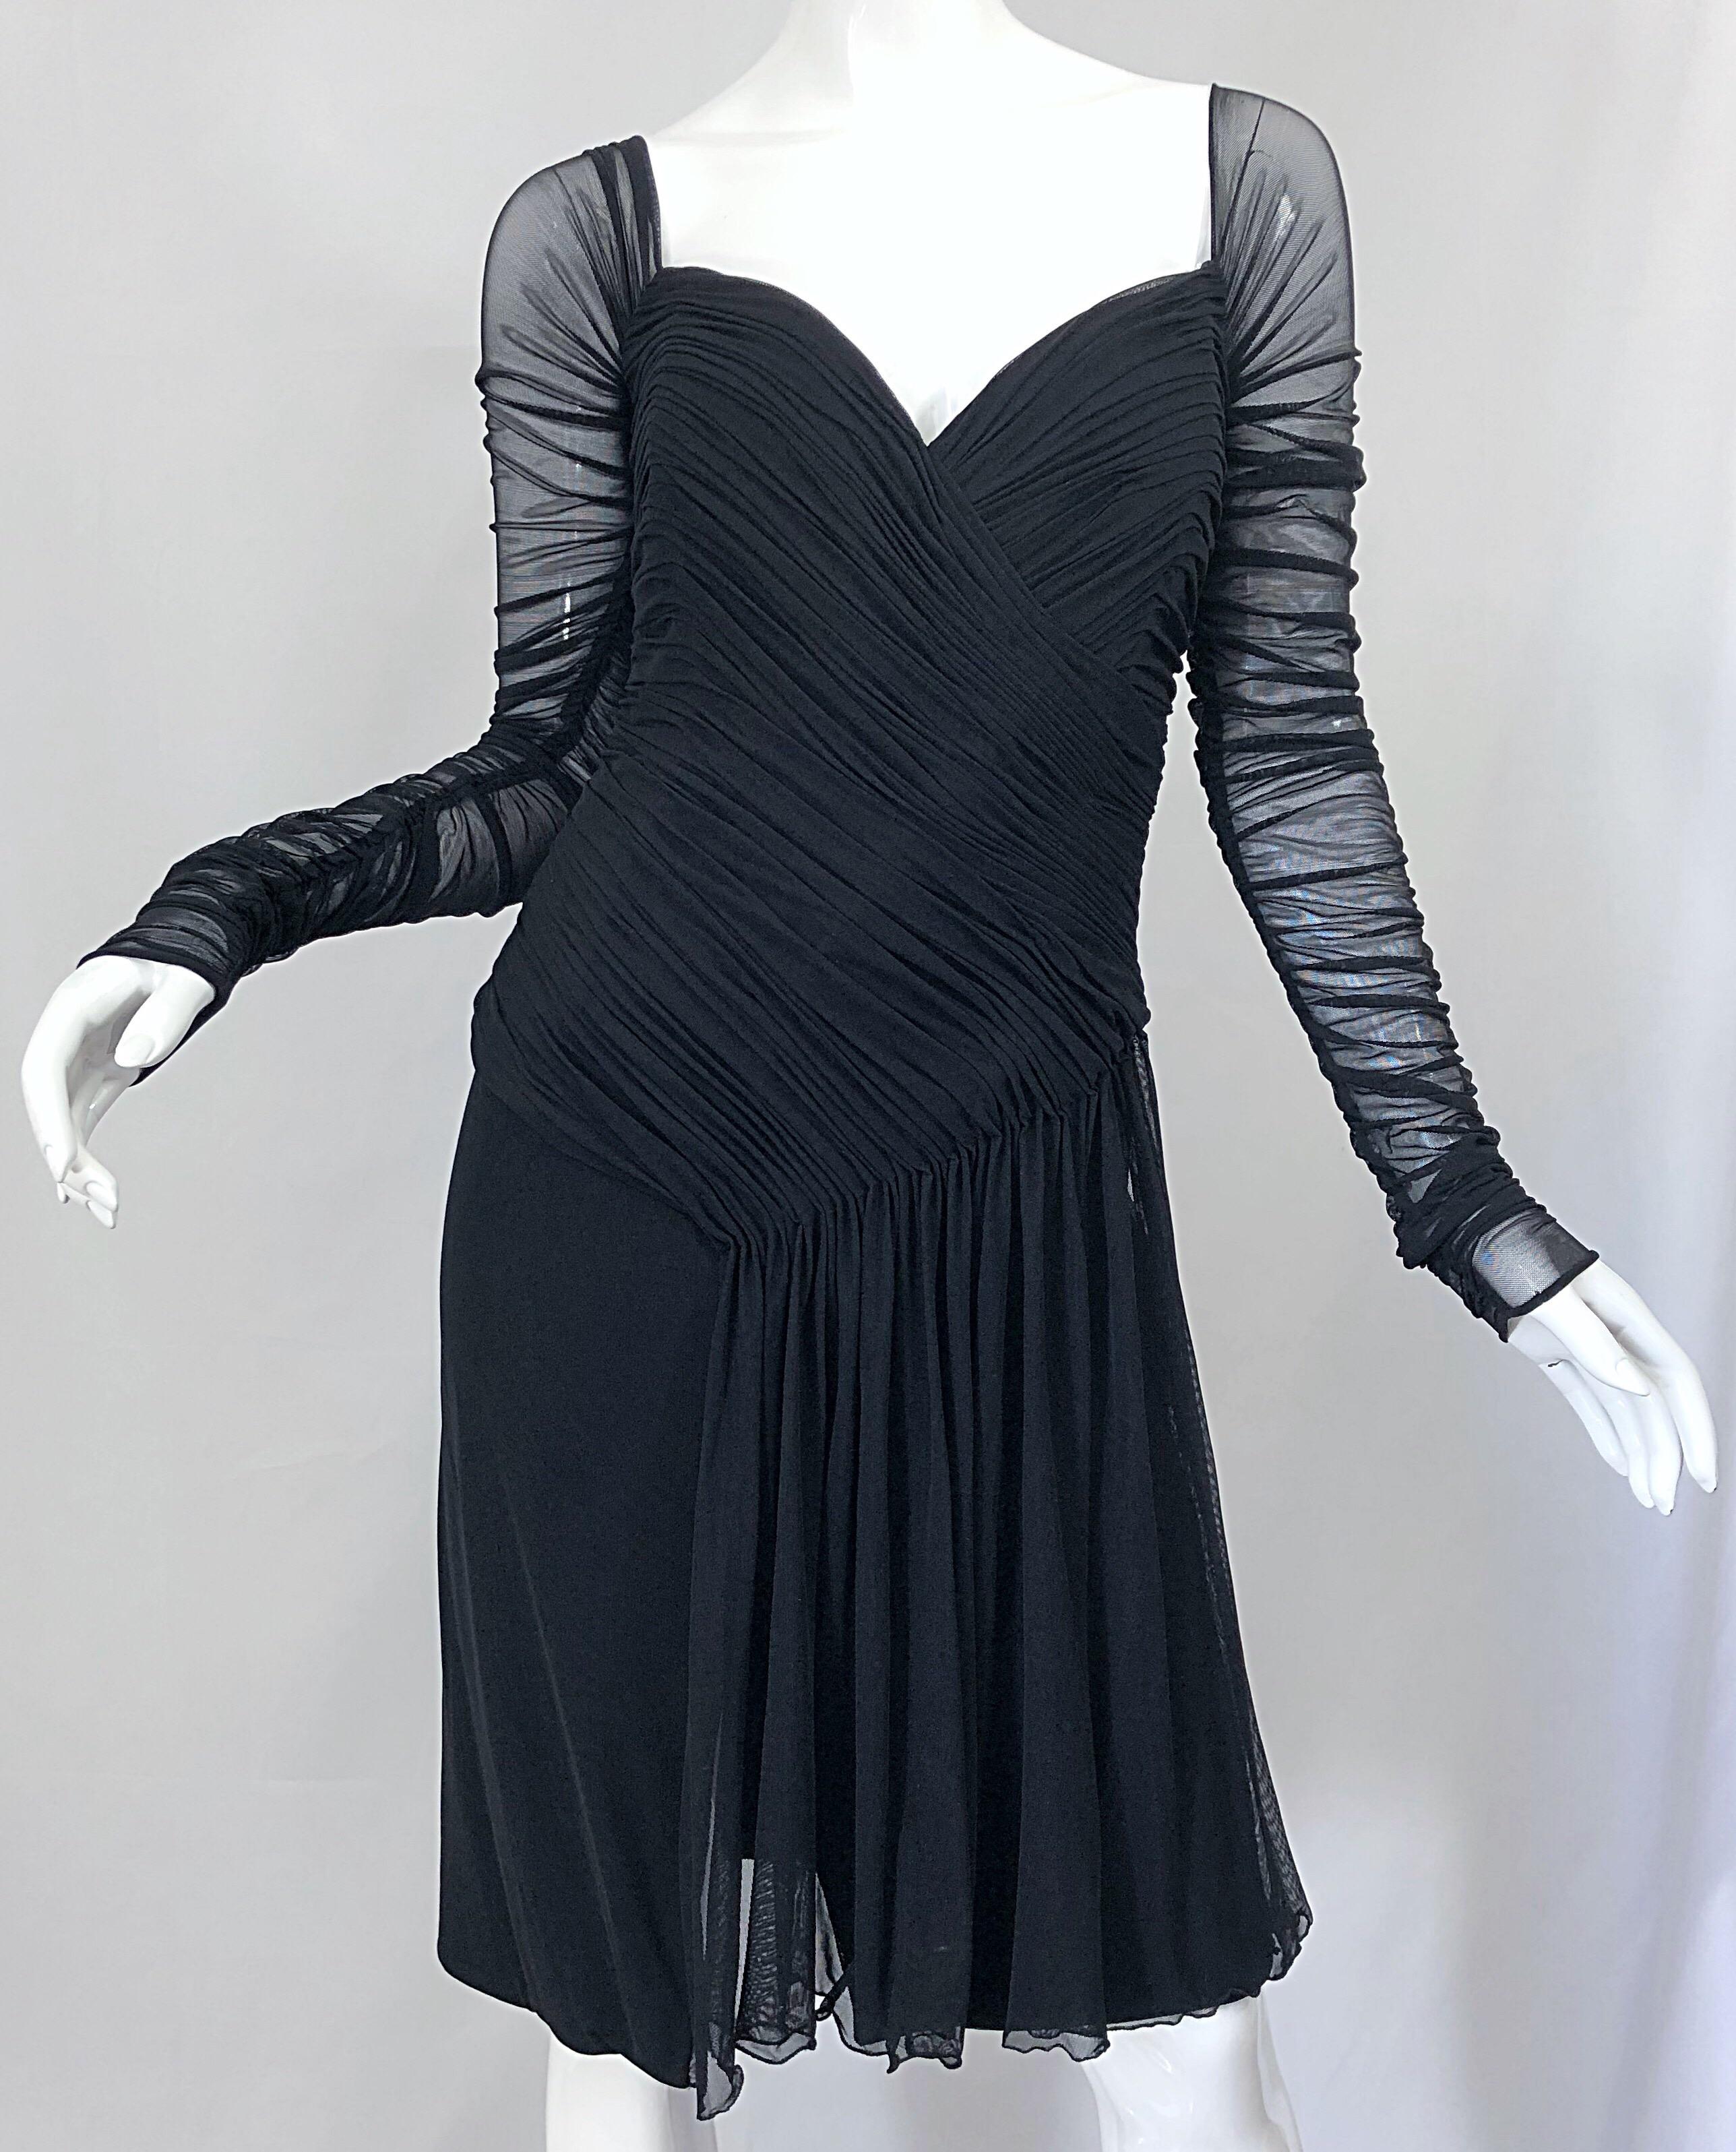 Vintage Vicky Tiel Couture 1980s Black Mesh Sweetheart Flirty Cocktail Dress LBD For Sale 2